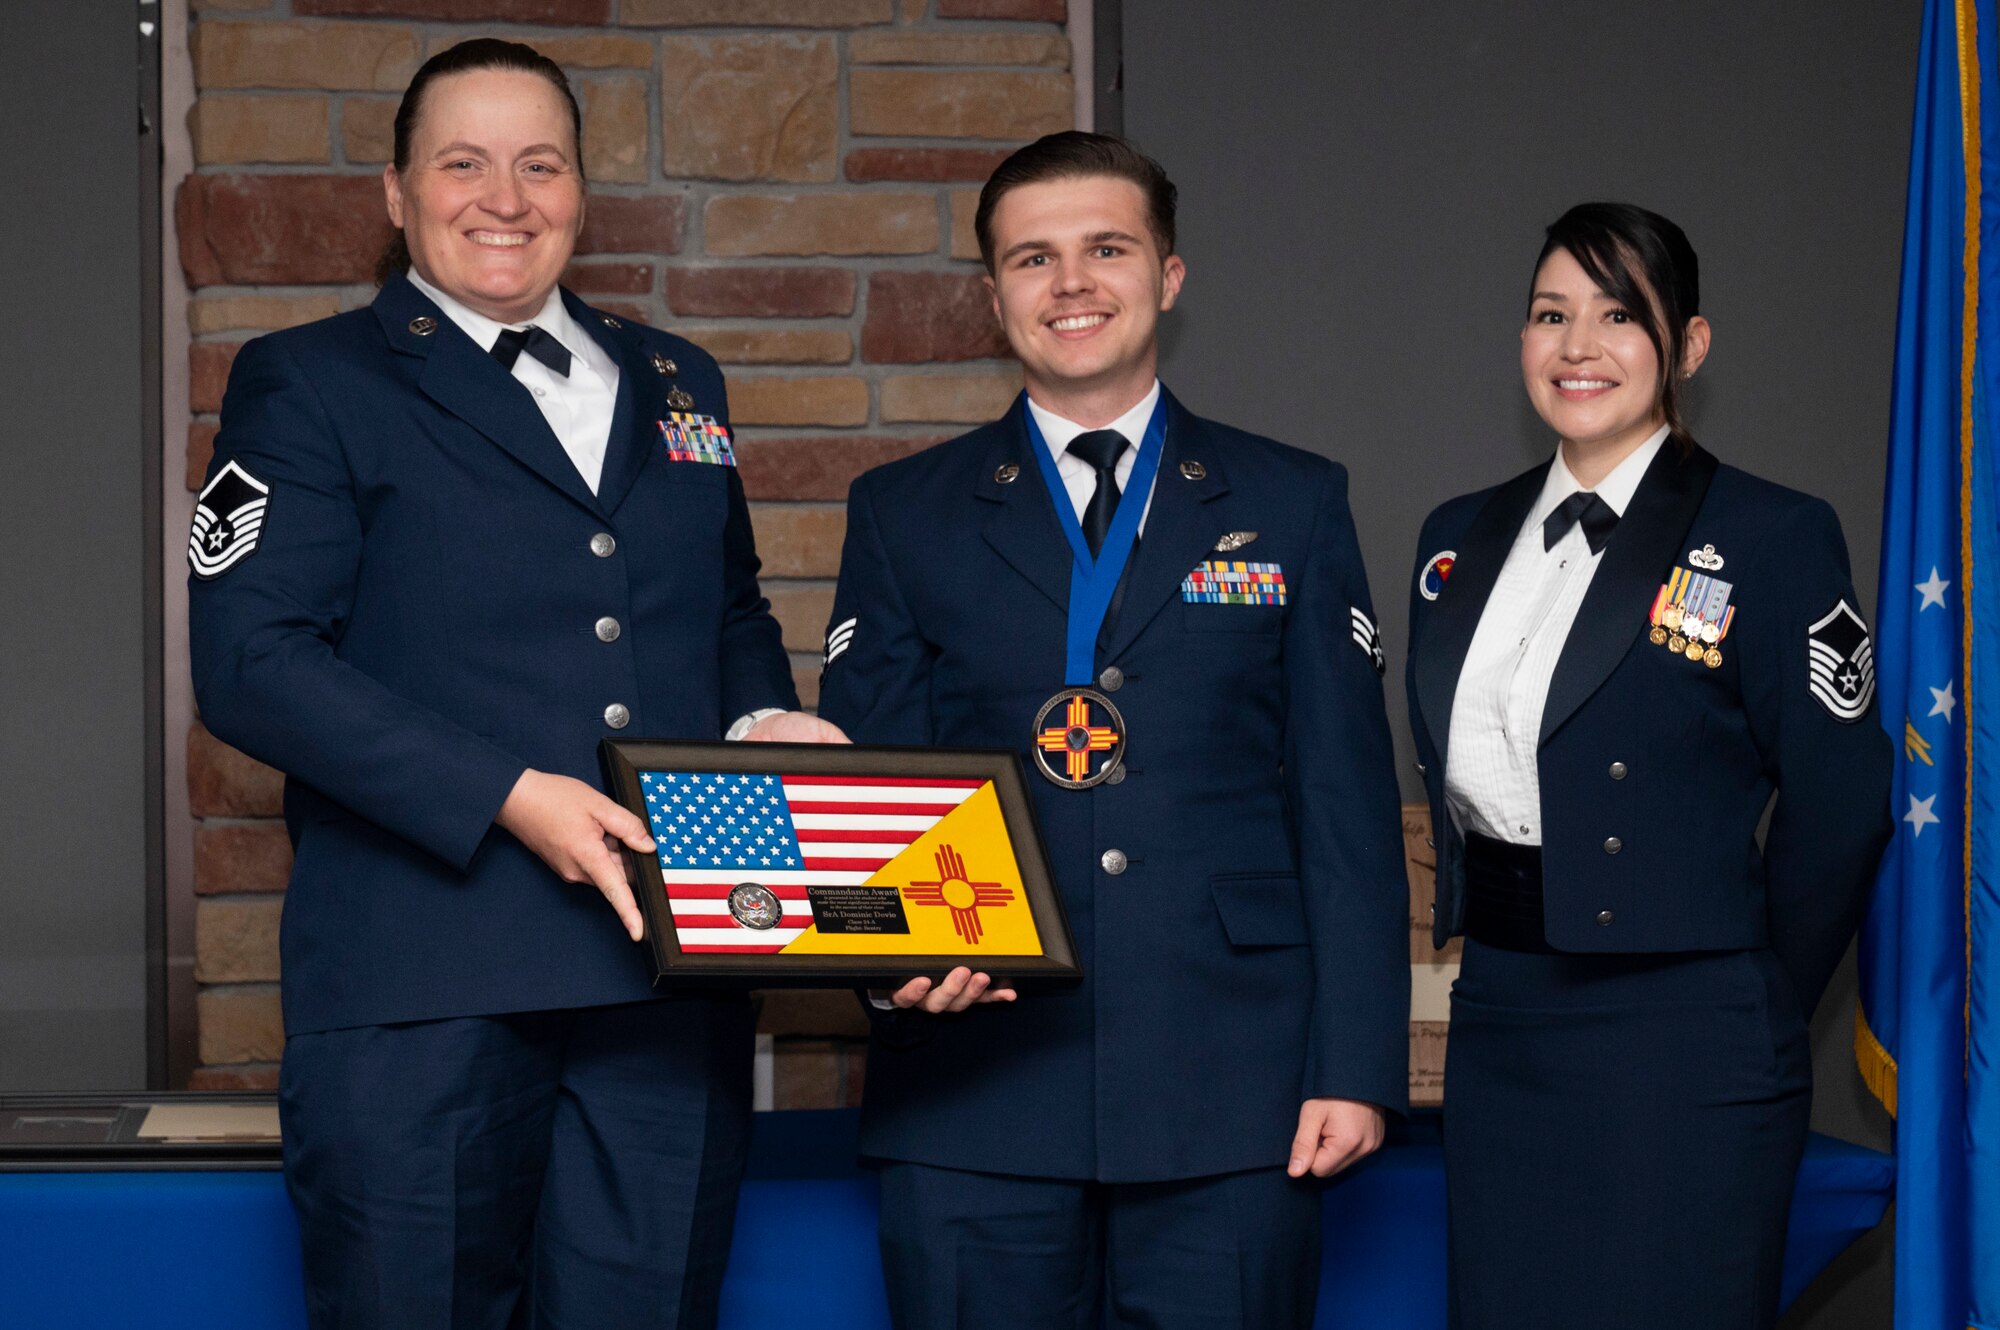 U.S. Air Force Senior Airman Dominic Devio, center, Airman Leadership Graduate, accepts the Commandant’s Award from U.S. Air Force Master Sgt. Angela McAllister, left, and U.S. Air Force Master Sgt. Cecilia Ayon during the graduation of Joel C. Mayo Class 24-A at Holloman Air Force Base, New Mexico, Nov. 2, 2023. The Commandant’s award is selected by the ALS commandant and is presented to the student who best demonstrates the characteristics of an effective leader. (U.S. Air Force photo by Airman 1st Class Michelle Ferrari)